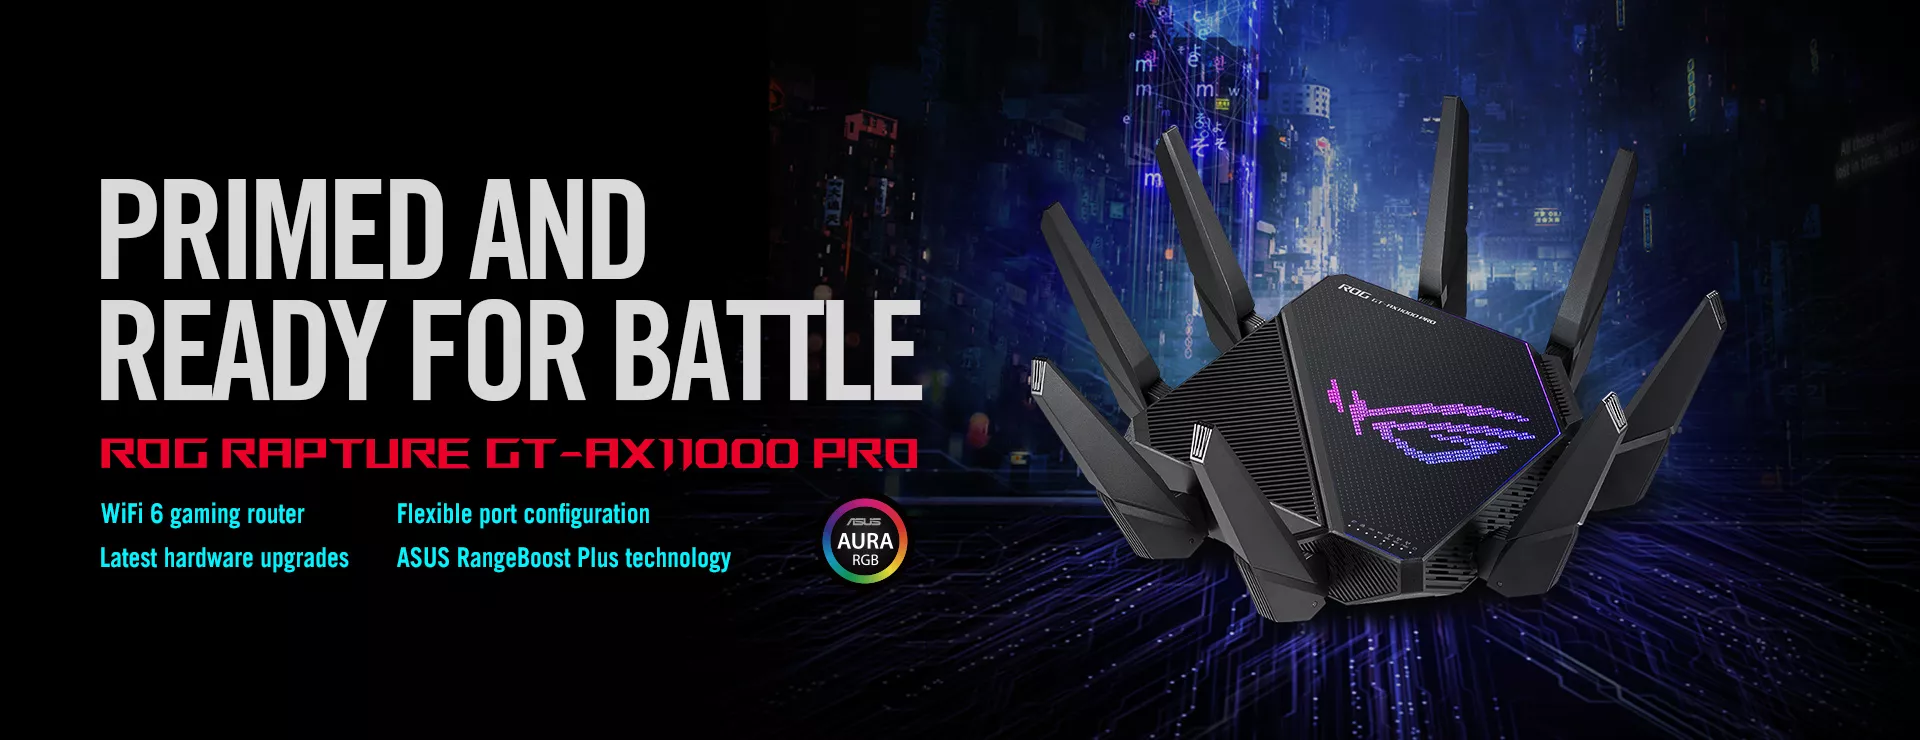 A banner for new ROG Rapture GT-AX11000 Pro